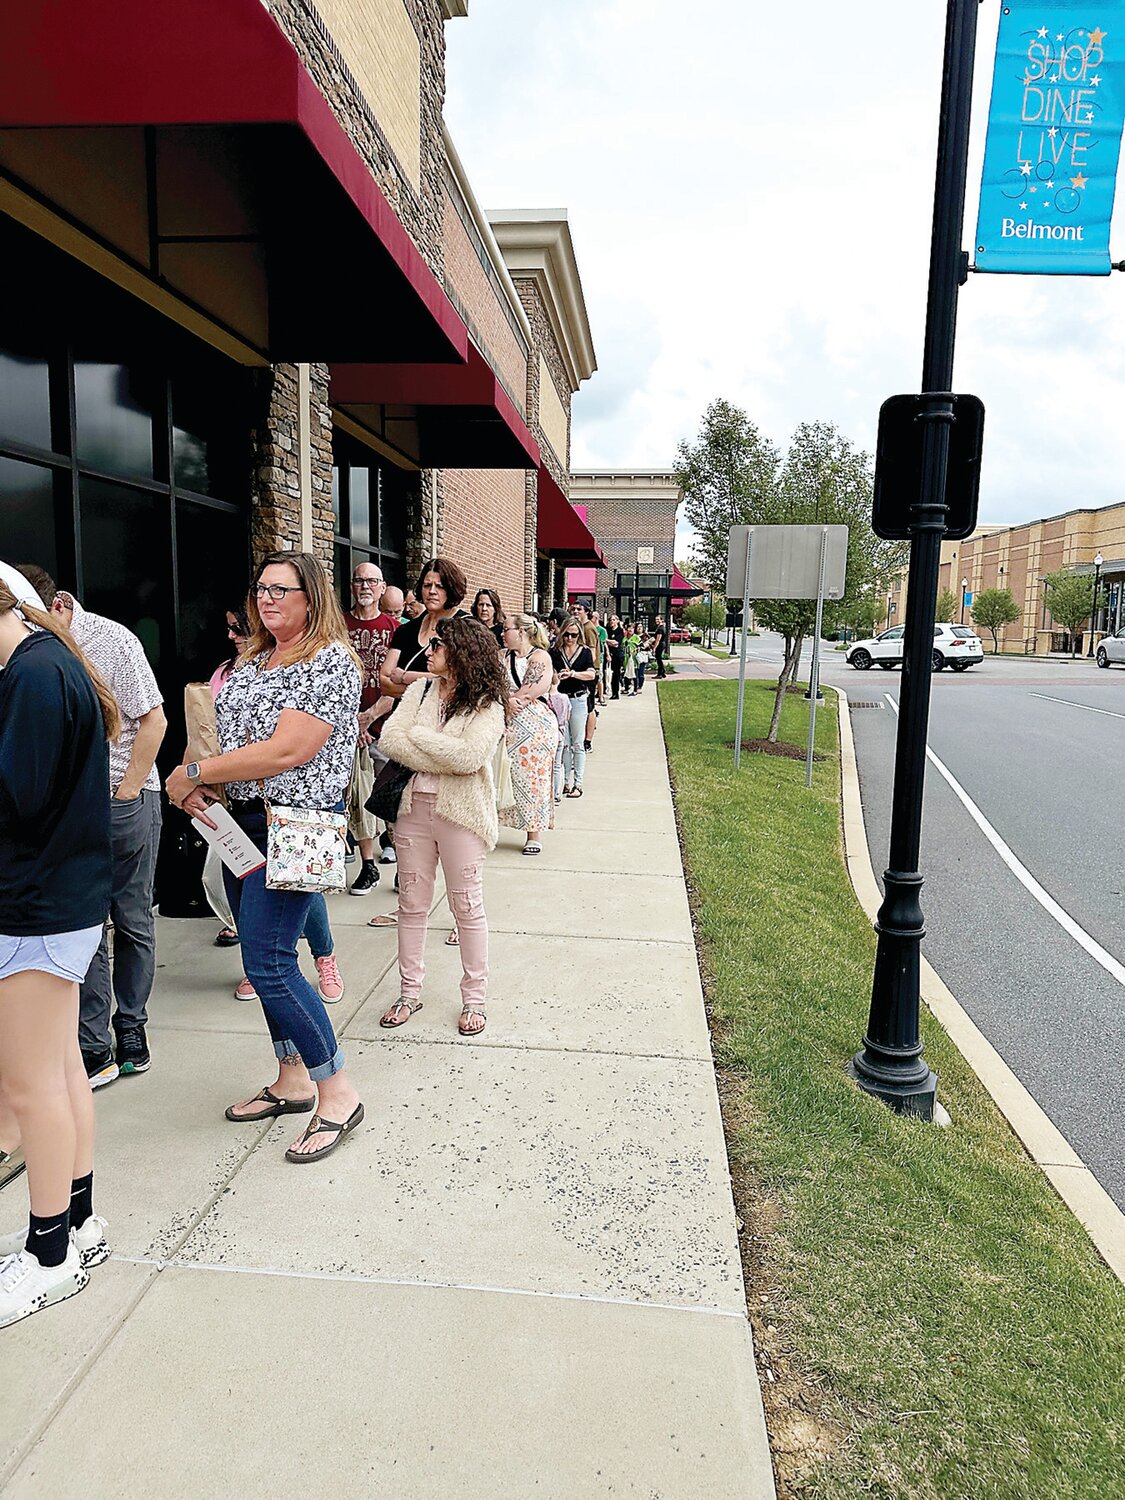 Fans of celebrity chef Robert Irvine wait in line outside the PA Fine Wine and Spirits store in Doylestown.